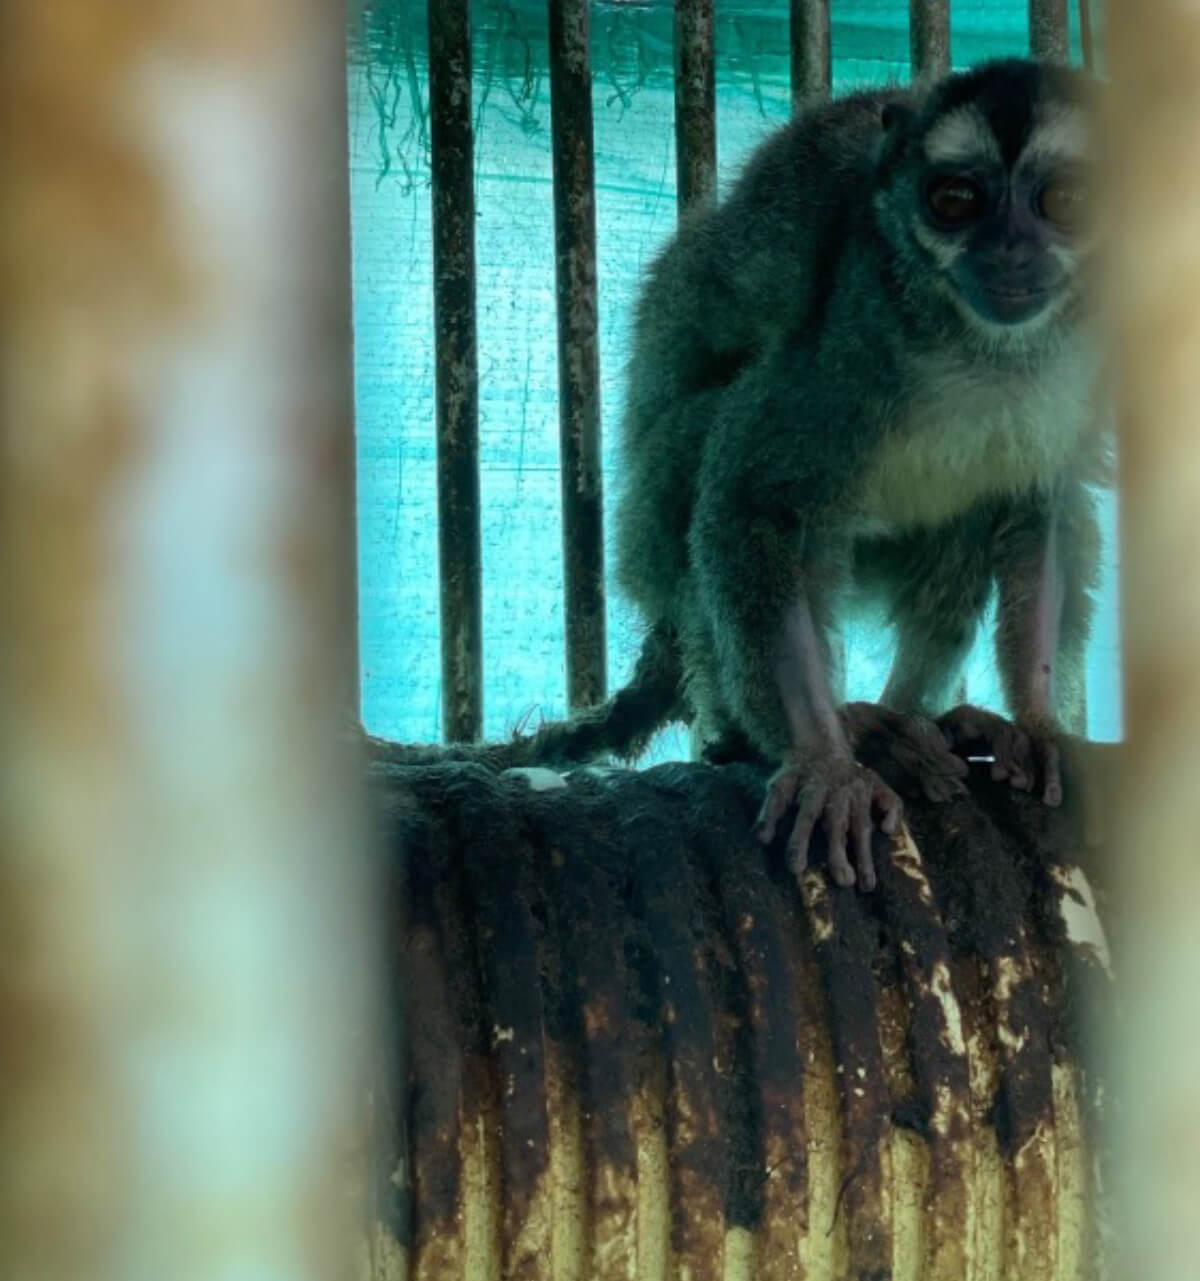 VIV Colombia Fundacion Centro de Primates FUCEP Aotus monkey with missing forearm hair perched on top of a corrugated pipe nest soiled with feces PO VS Colombian Organizations Sell Dubious "Science"